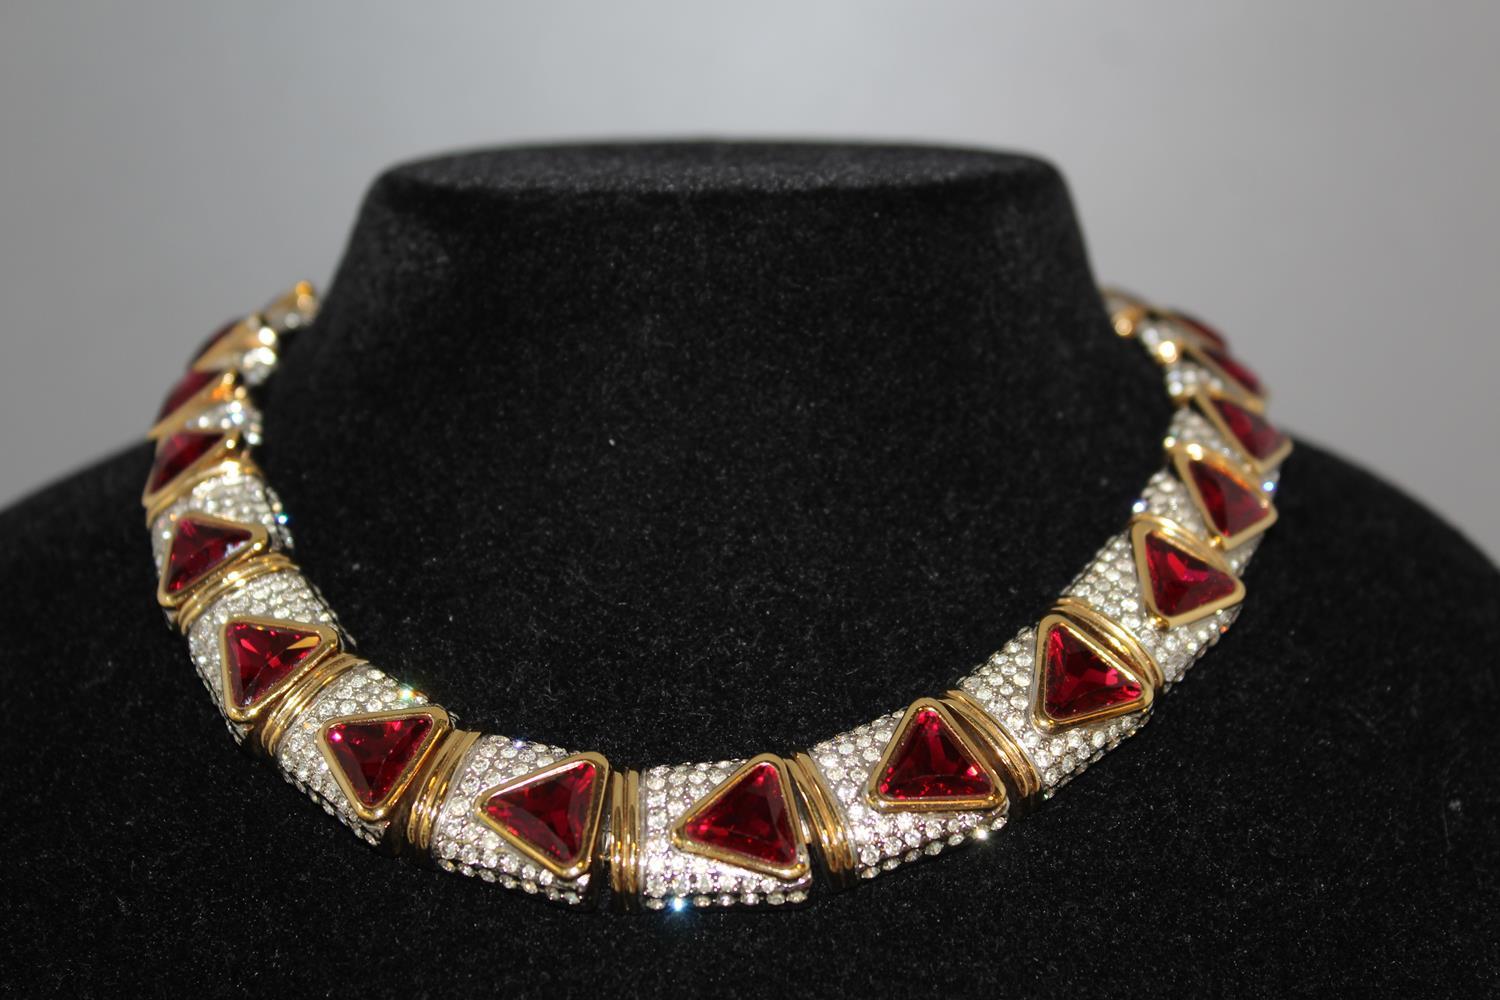 Fantastic vintage masterpiece by Carlo Zini
One of the world greatest bijoux designers
Non allergenic brass
18 KT Gold dipped 3 micron
Amazing hand creation of Ruby like elements and Swarovski crystals 
100% Artisanal work
SO beautiful that seems